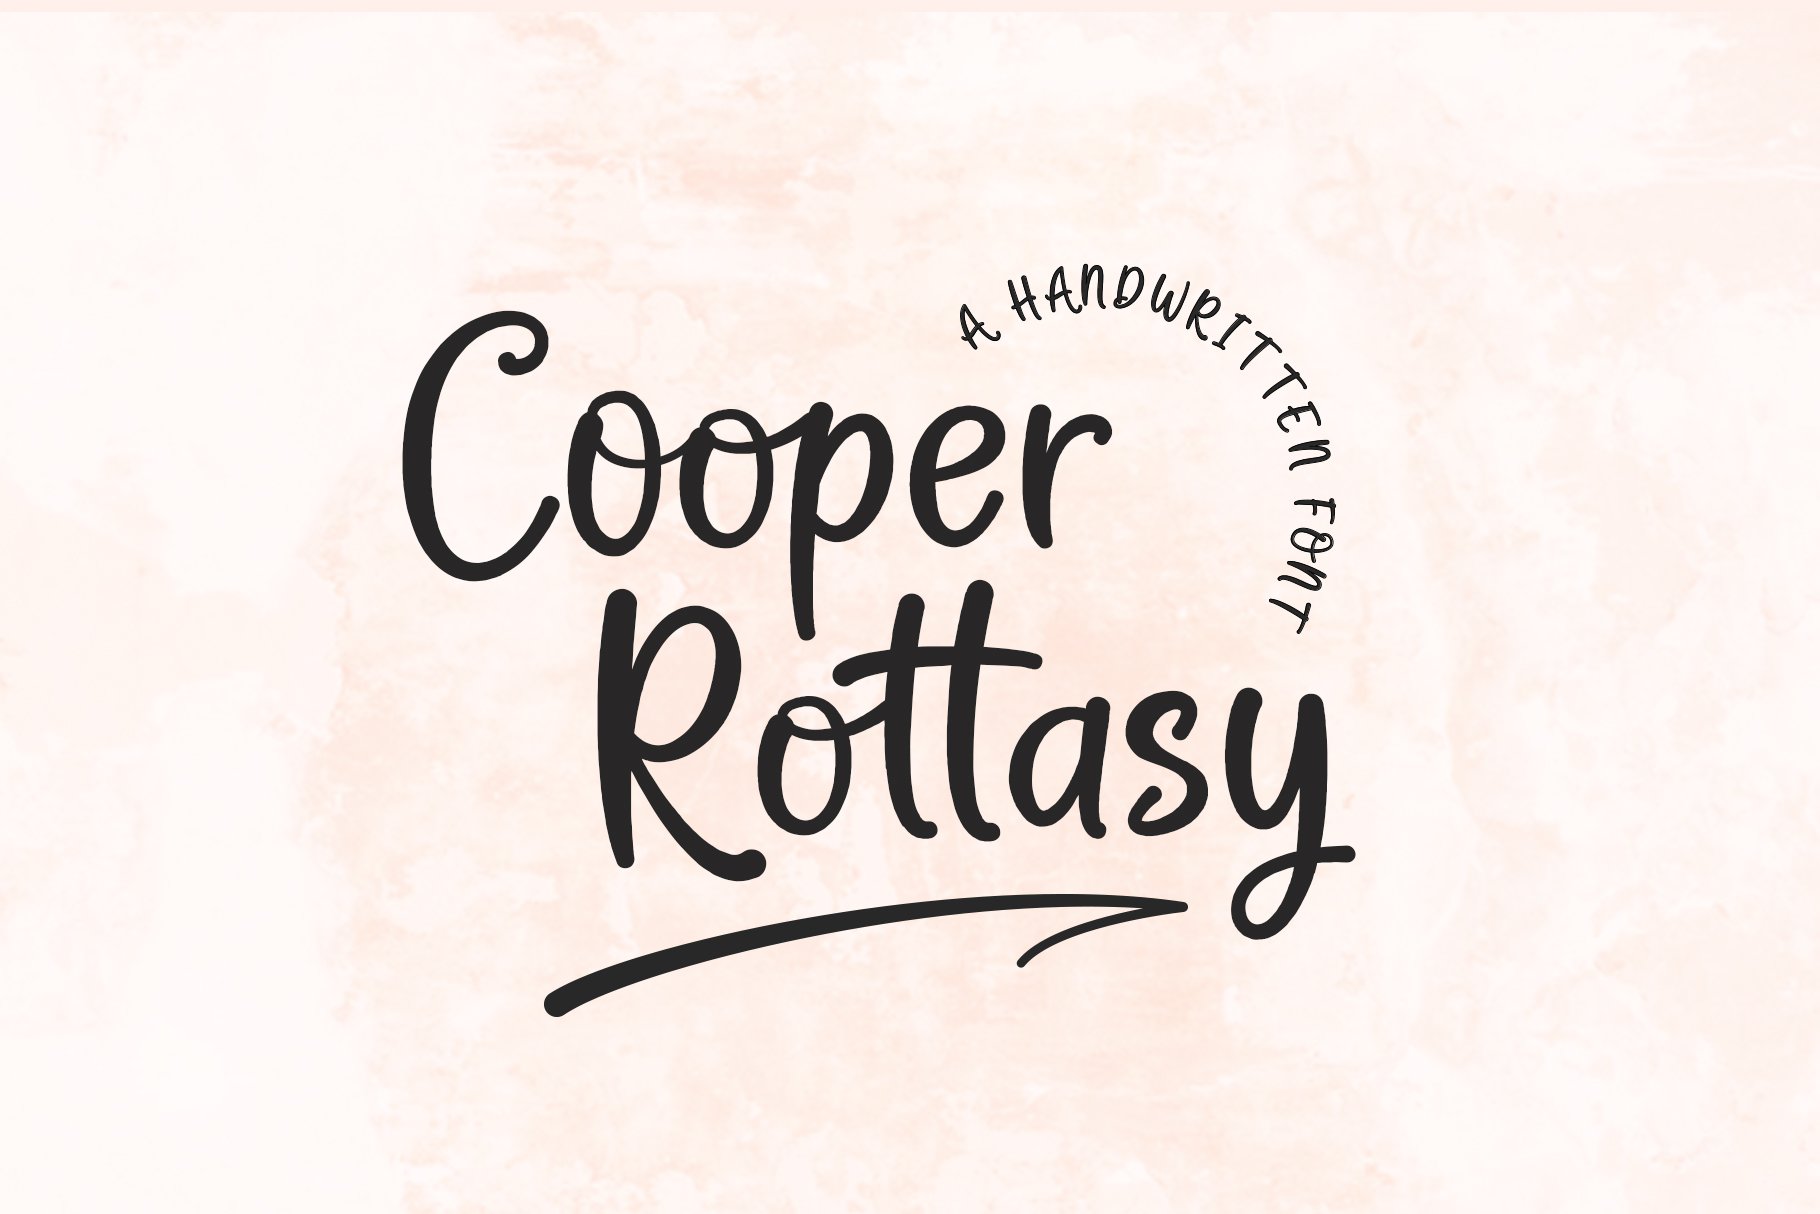 Cooper Rottasy | A Handwritten Font cover image.